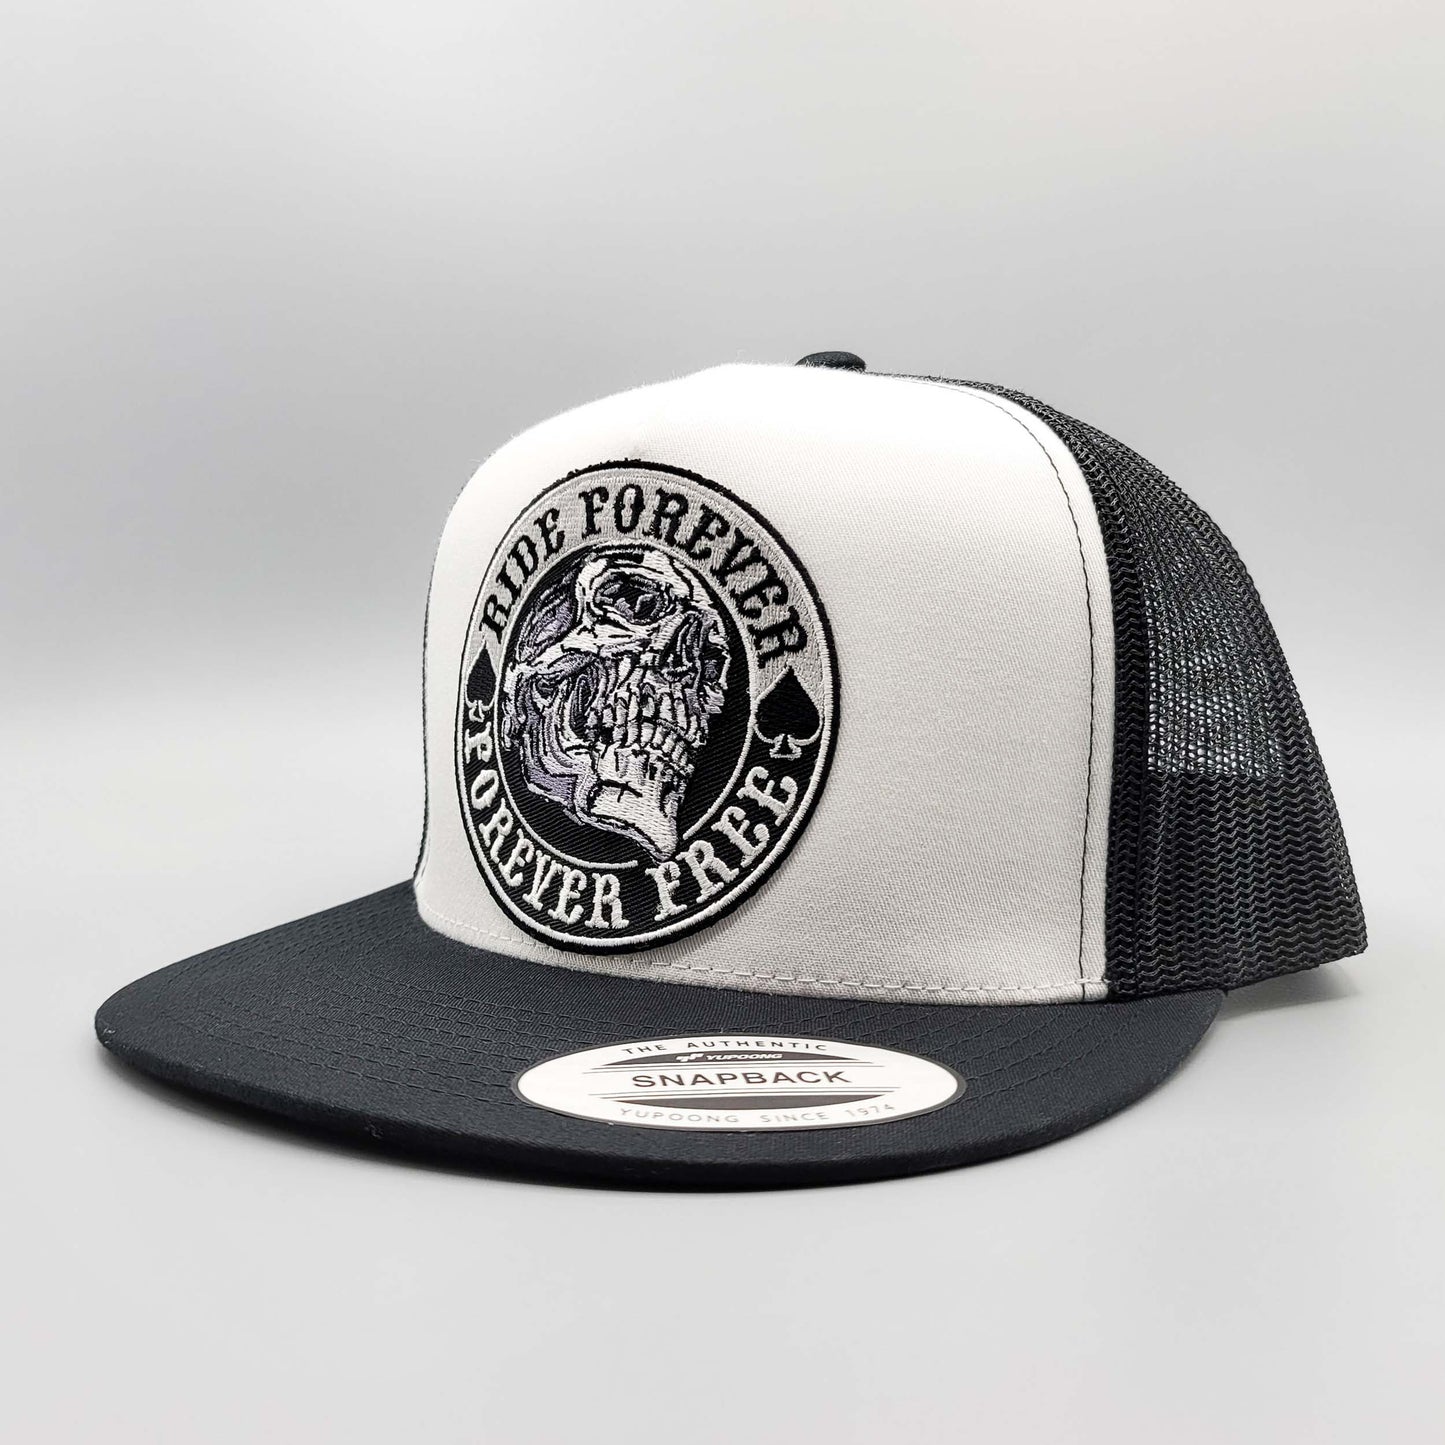 Ride Forever, Forever Free Motorcycle Trucker Hat